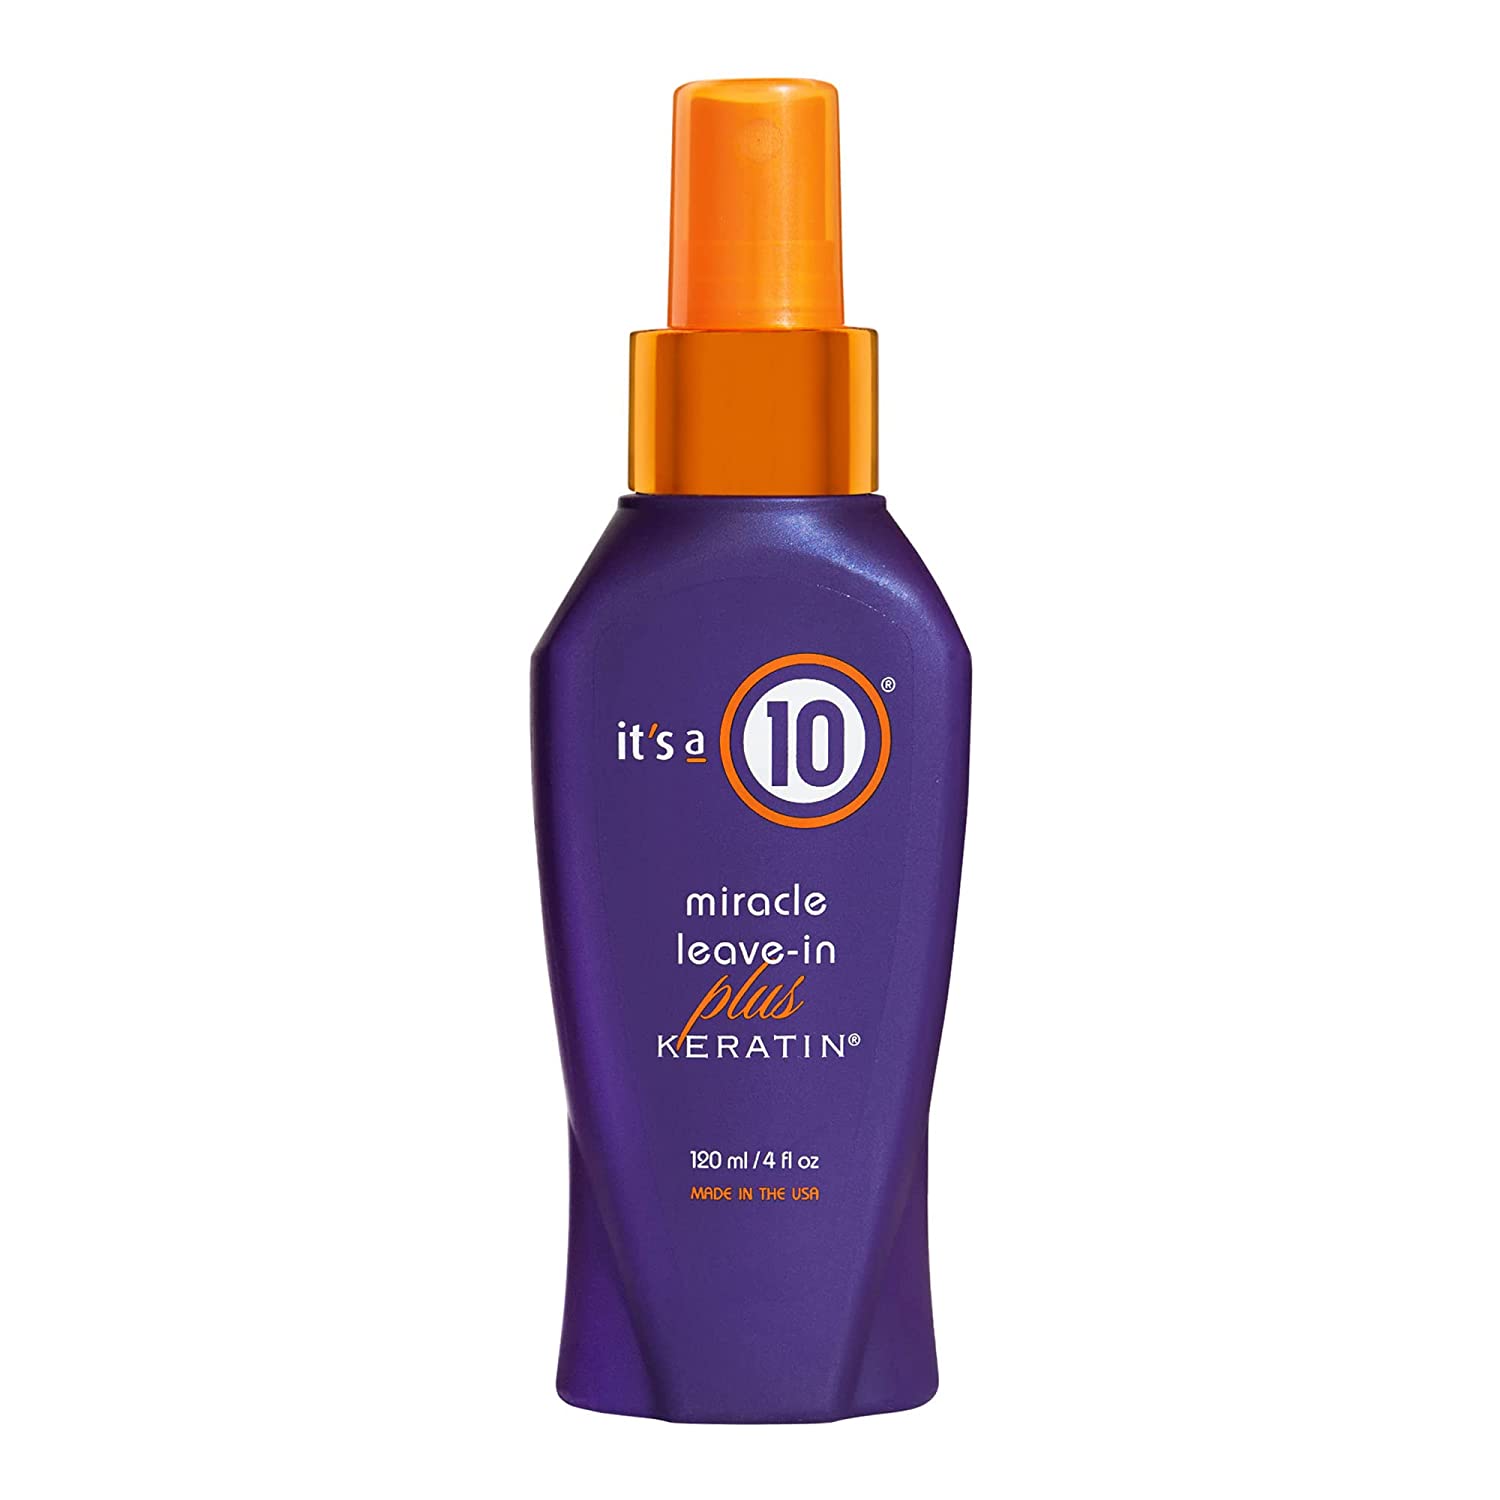 It's a 10 Haircare Miracle Leave-In Plus Keratin, 4 [...]